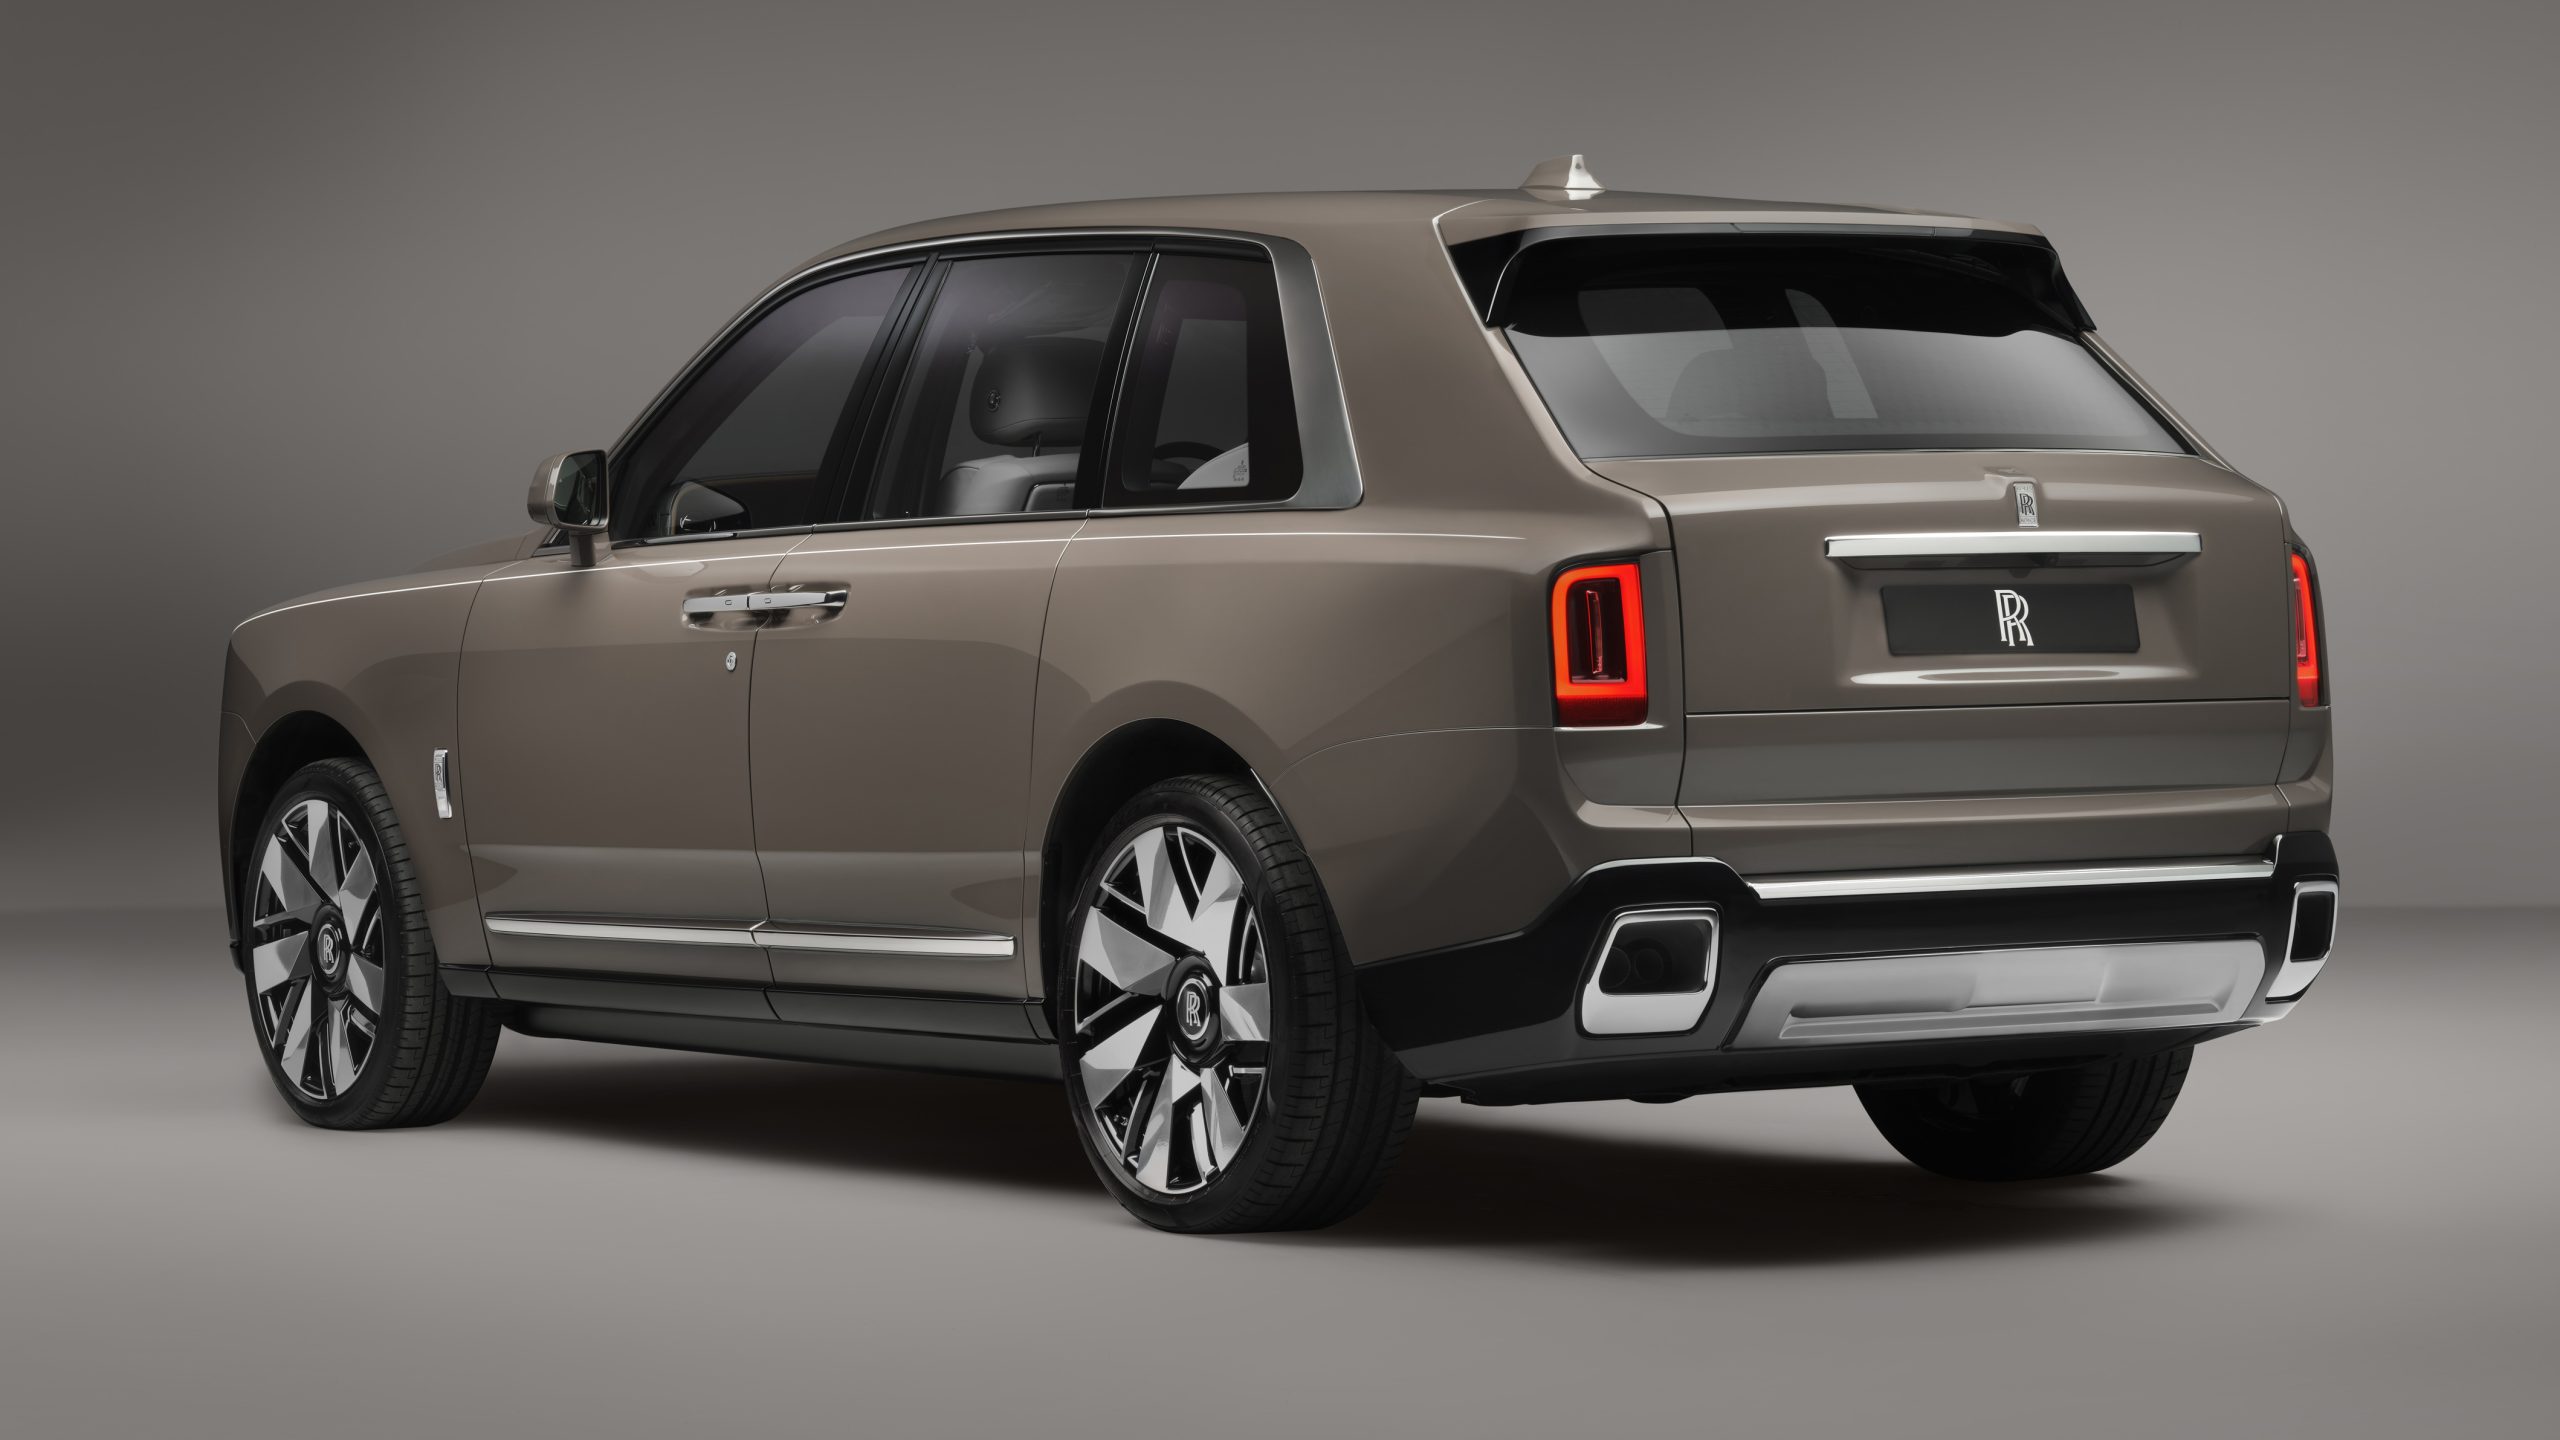 New Rolls-Royce Cullinan Series II Revealed with Design Enhancements